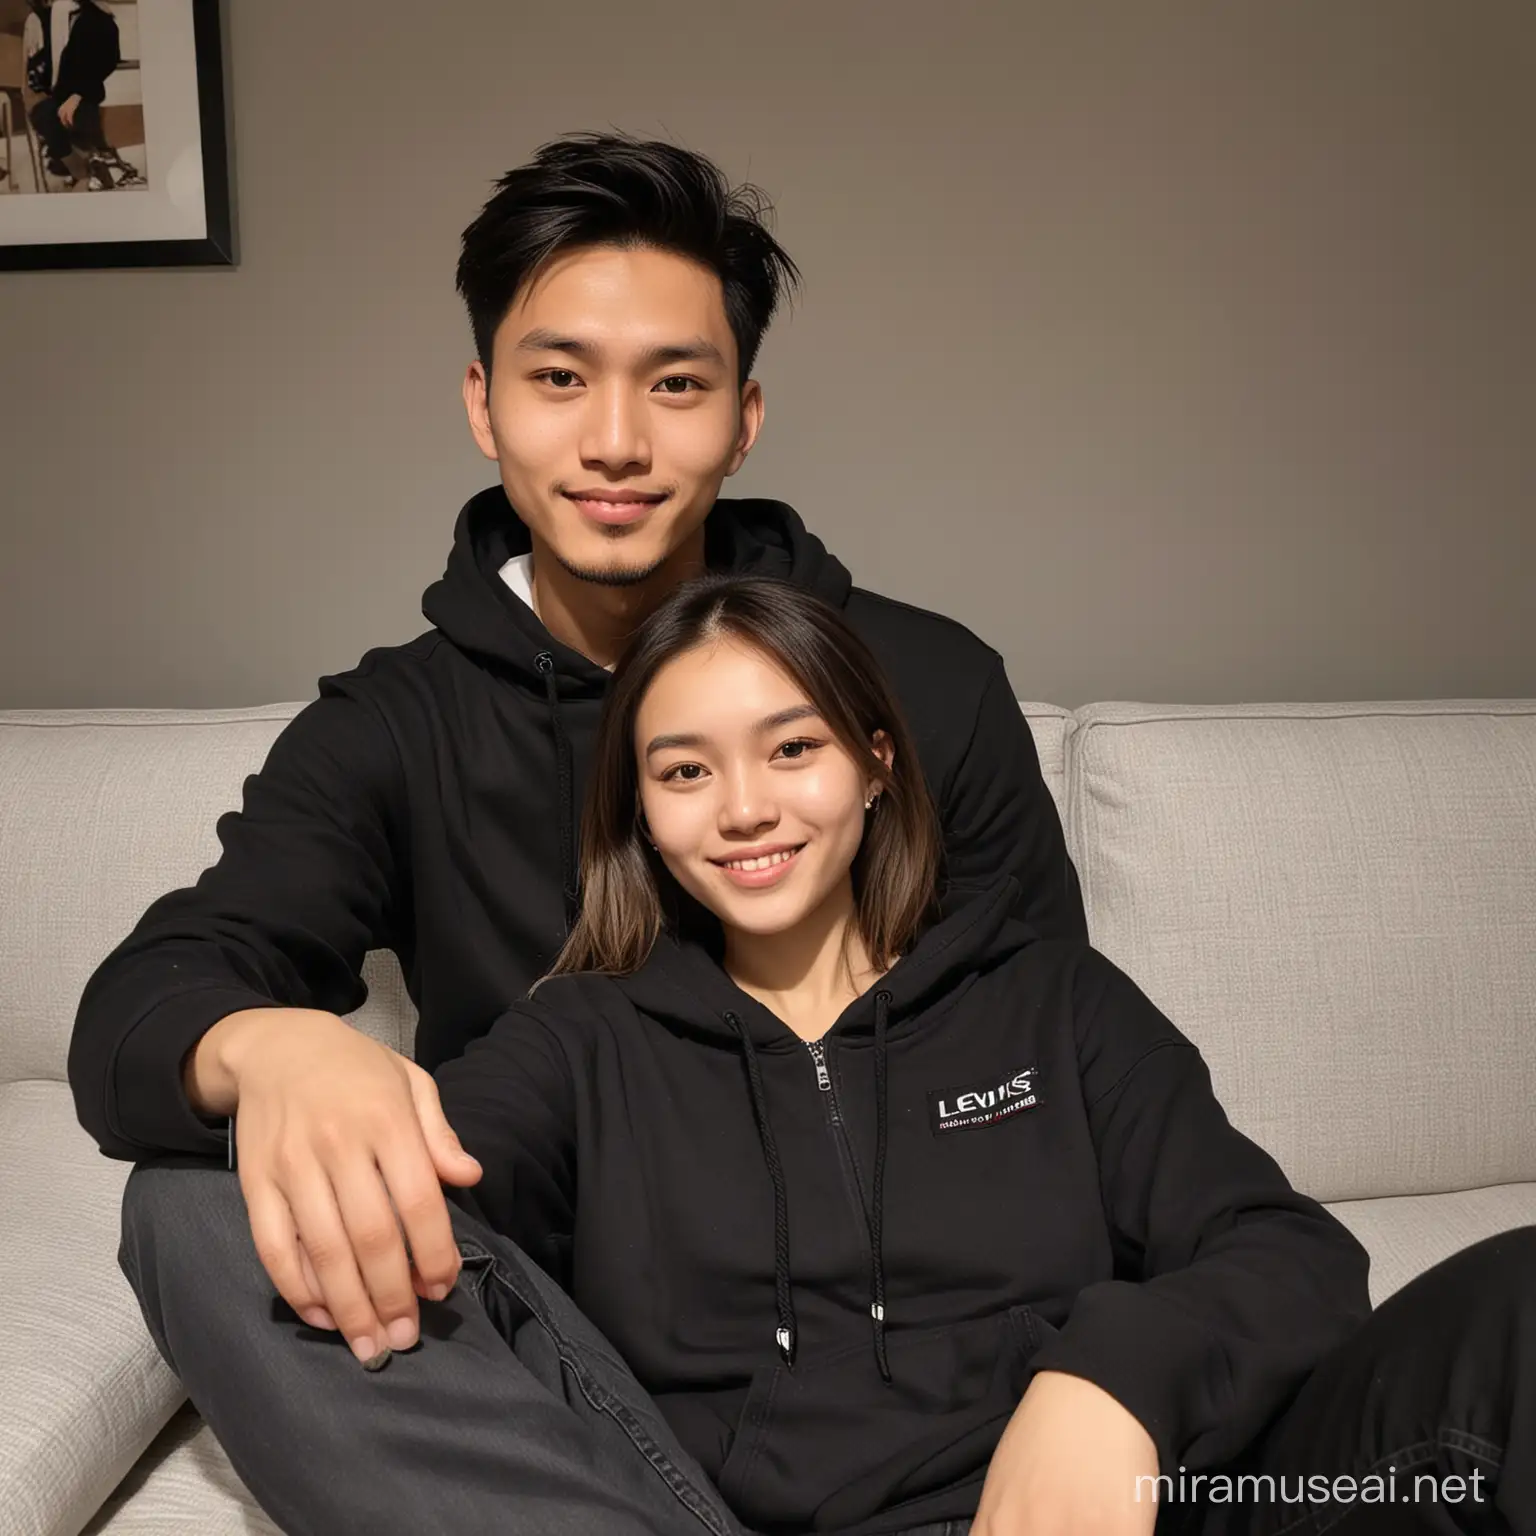 Youthful Asian Duo in Matching Outfits Taking a Selfie in a Cozy Home Setting